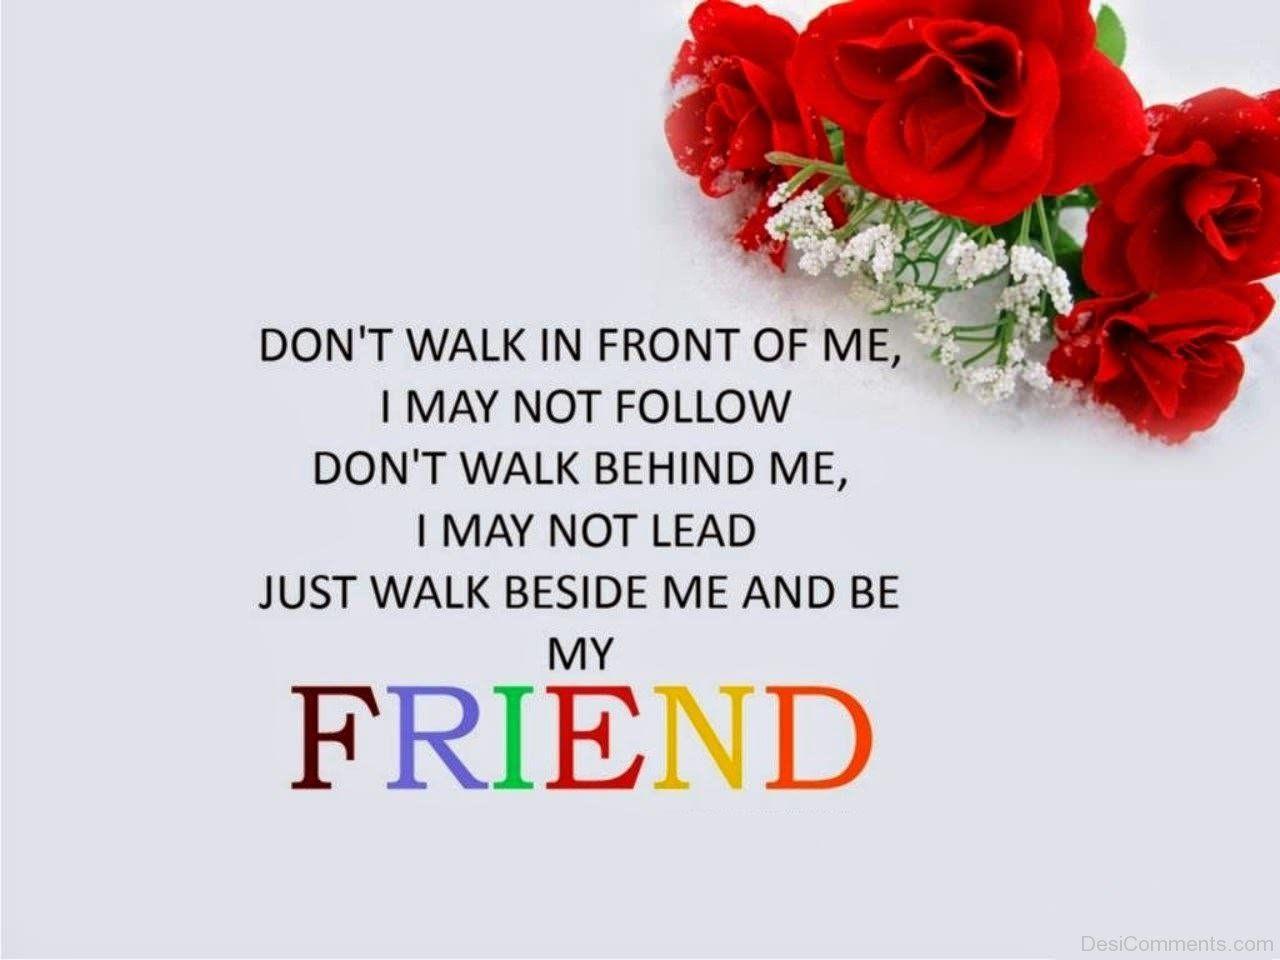 Friendship Quotes Picture, Image, Graphics